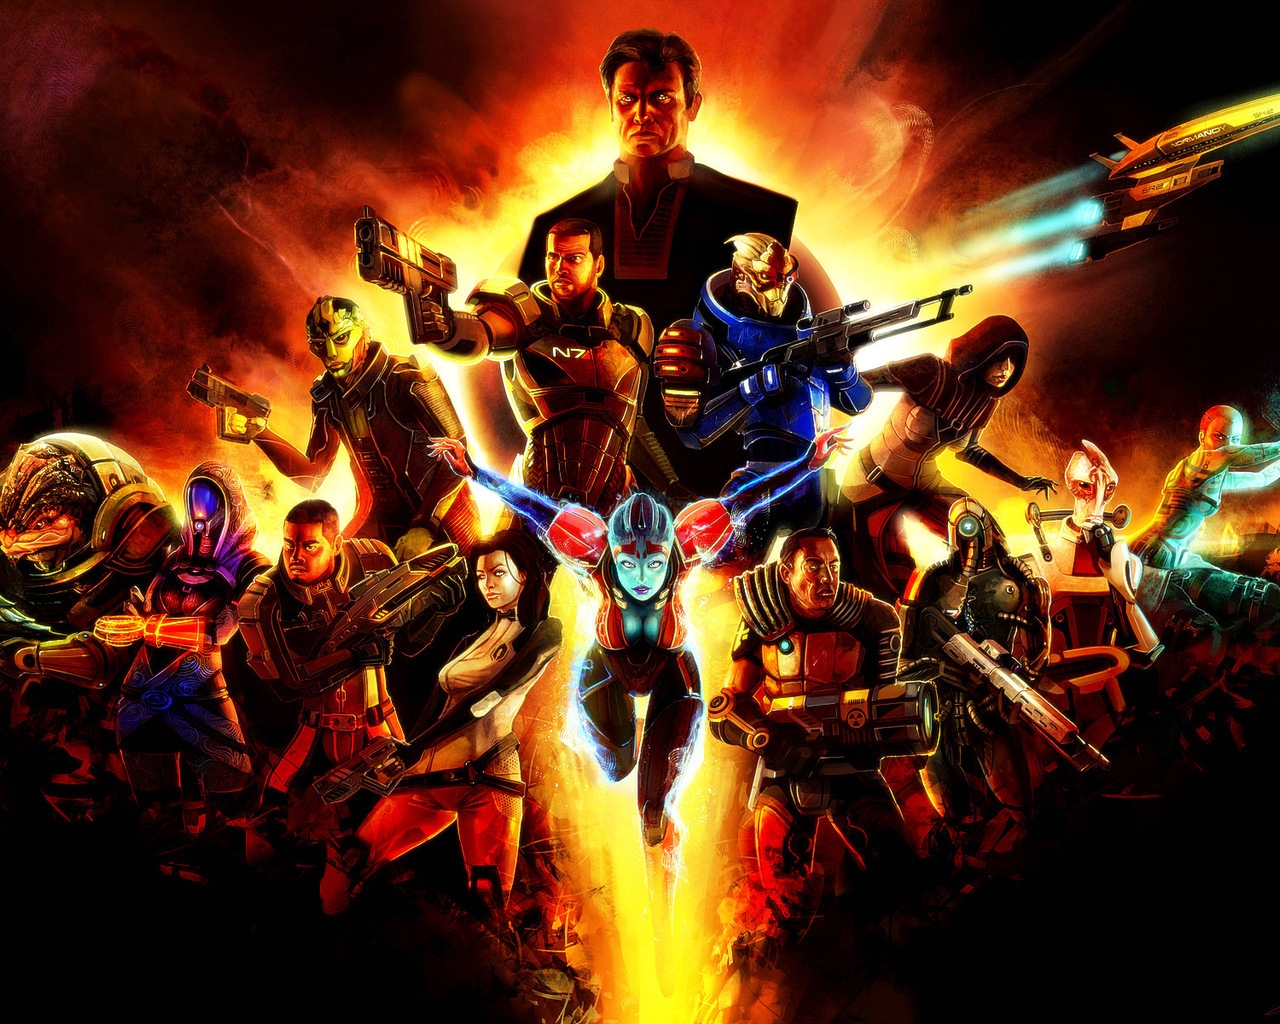 Mass Effect 2 Poster for 1280 x 1024 resolution